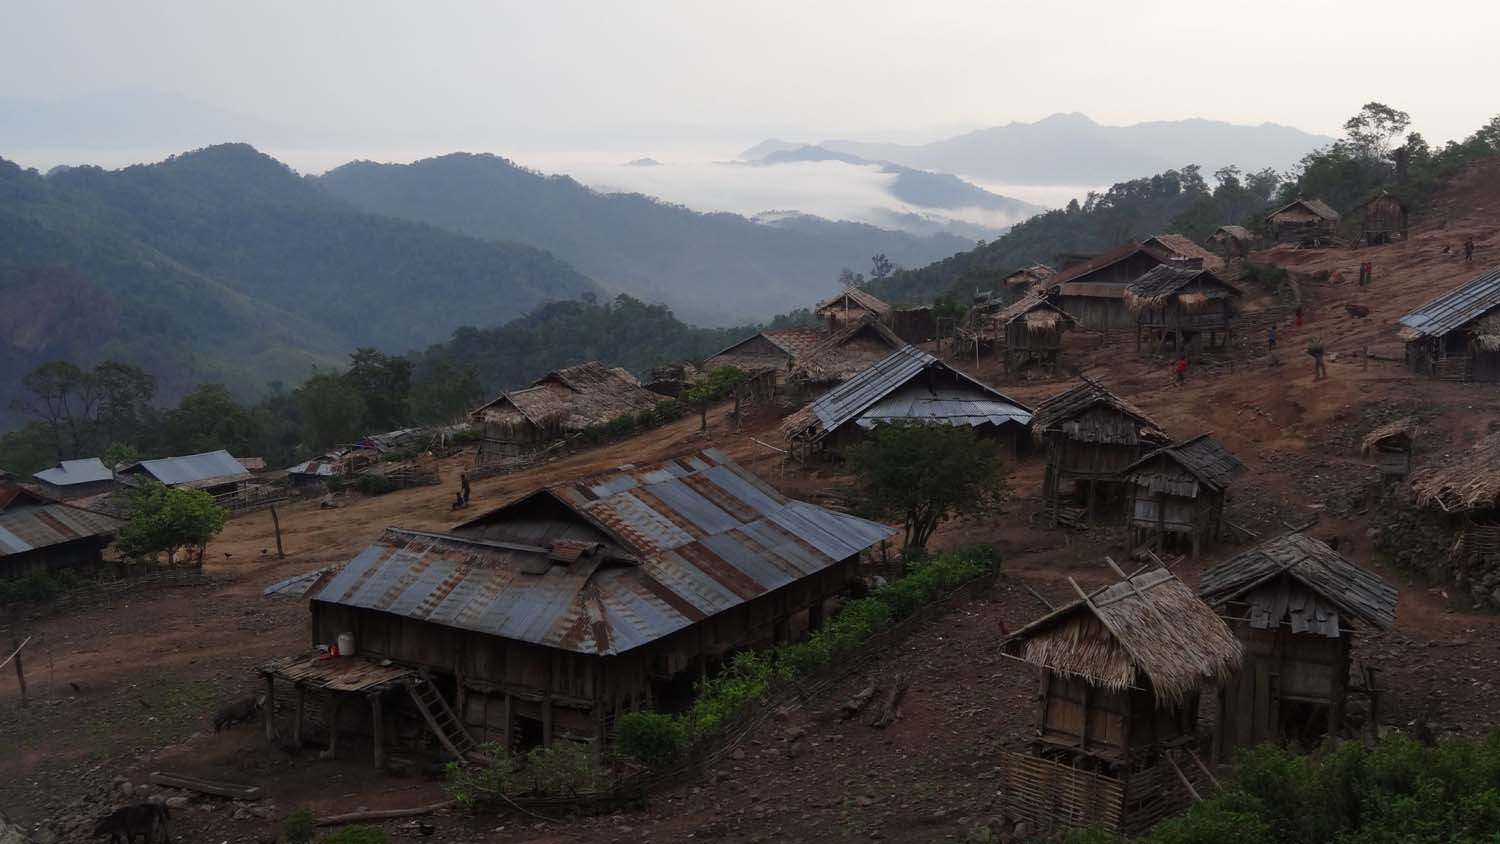 'our' Akha village. No roads and no electricity.